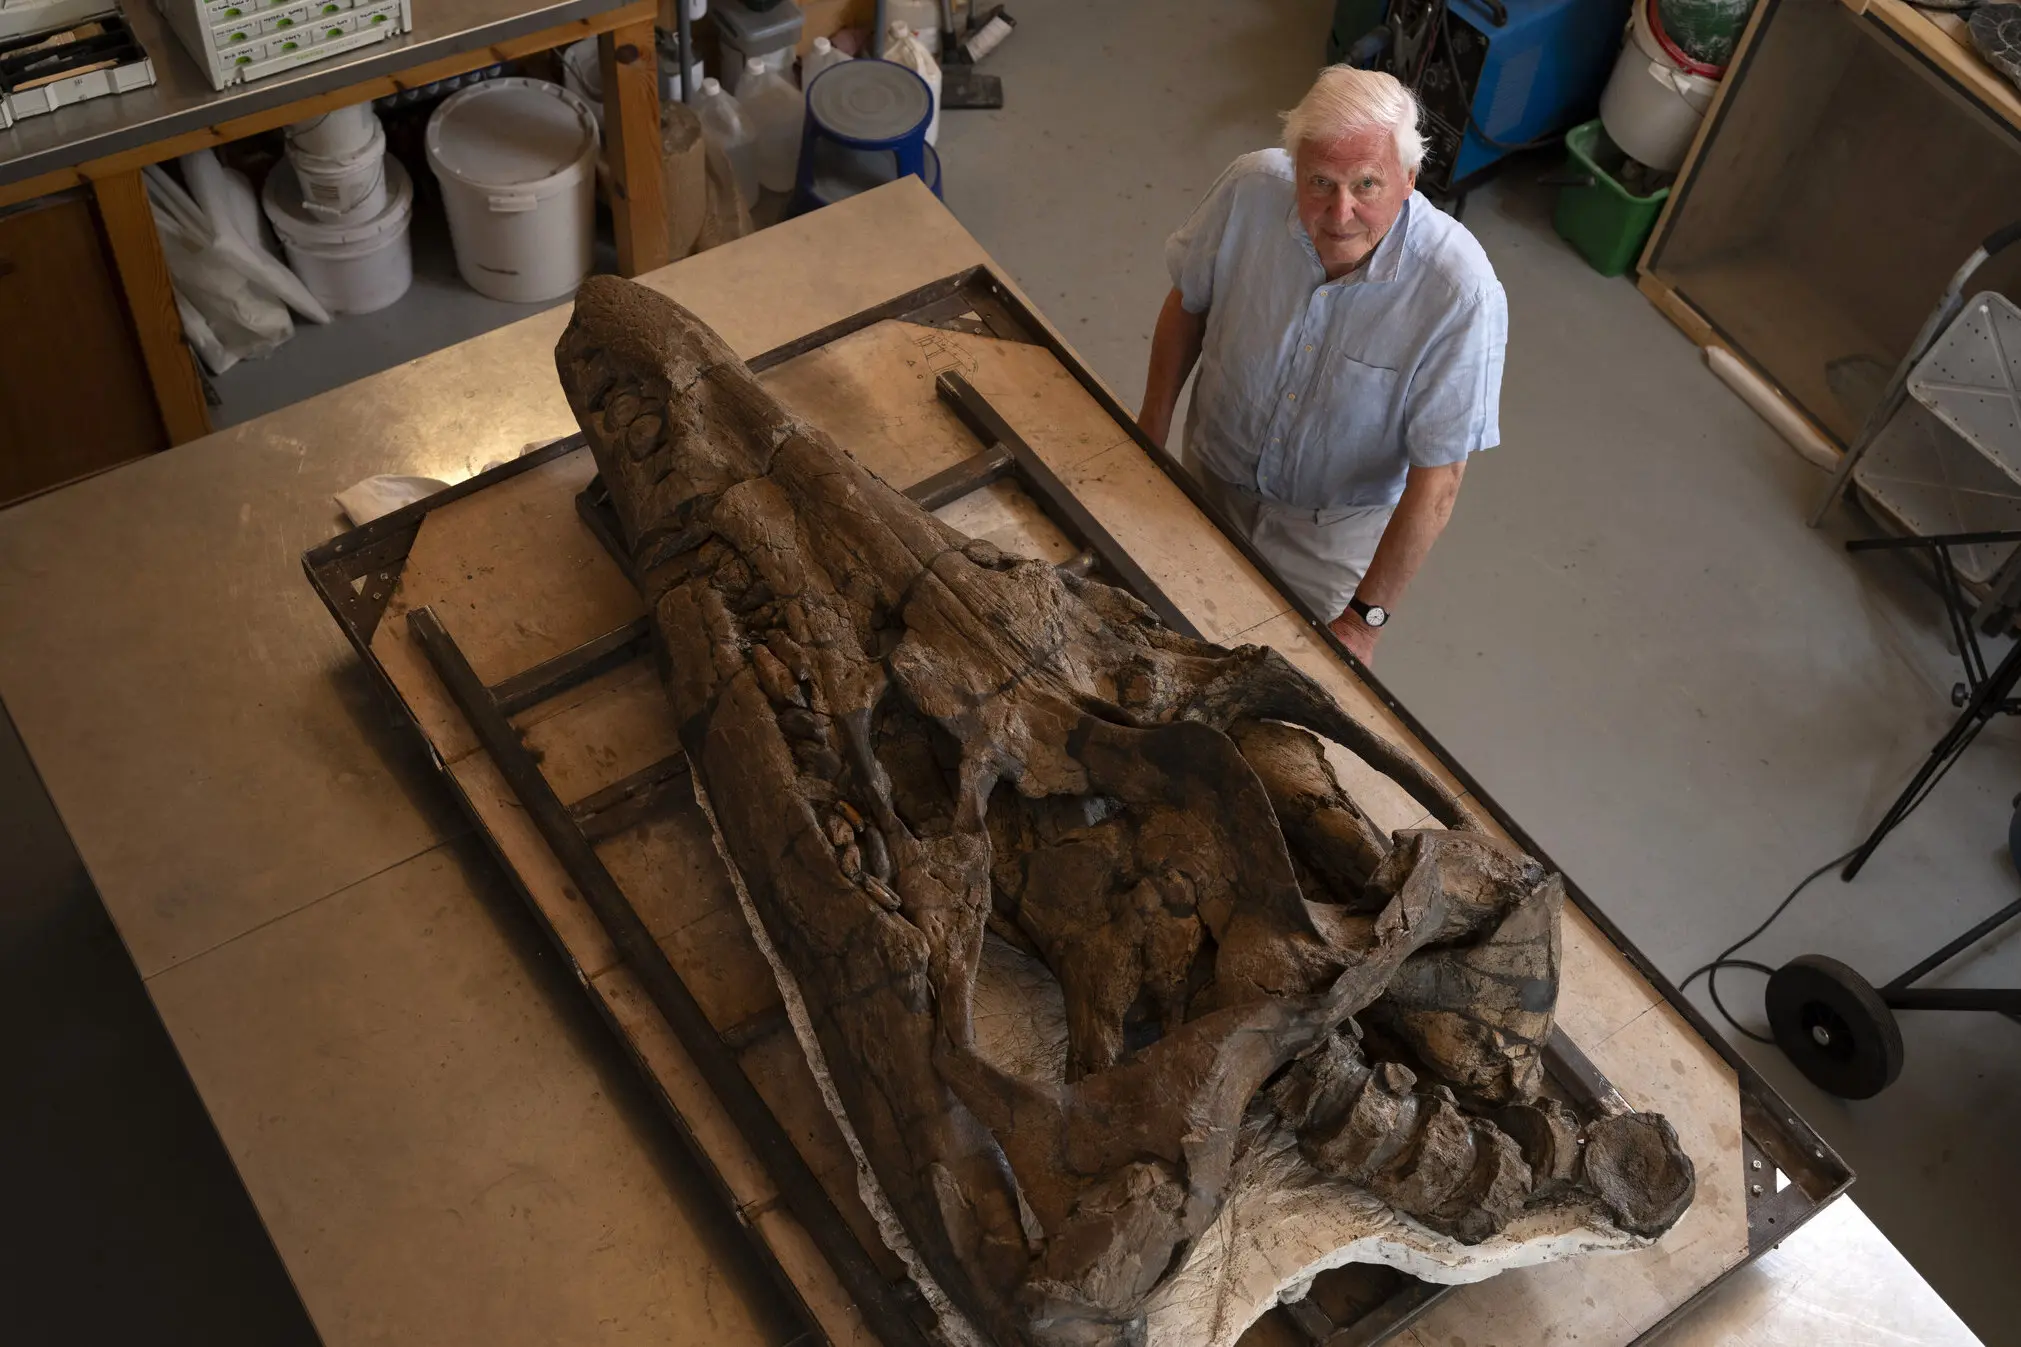 David Attenborough stands next to the recently discovered pliosaur fossil at the Etches Collection Museum of Jurassic Marine Life in Kimmeridge, England.